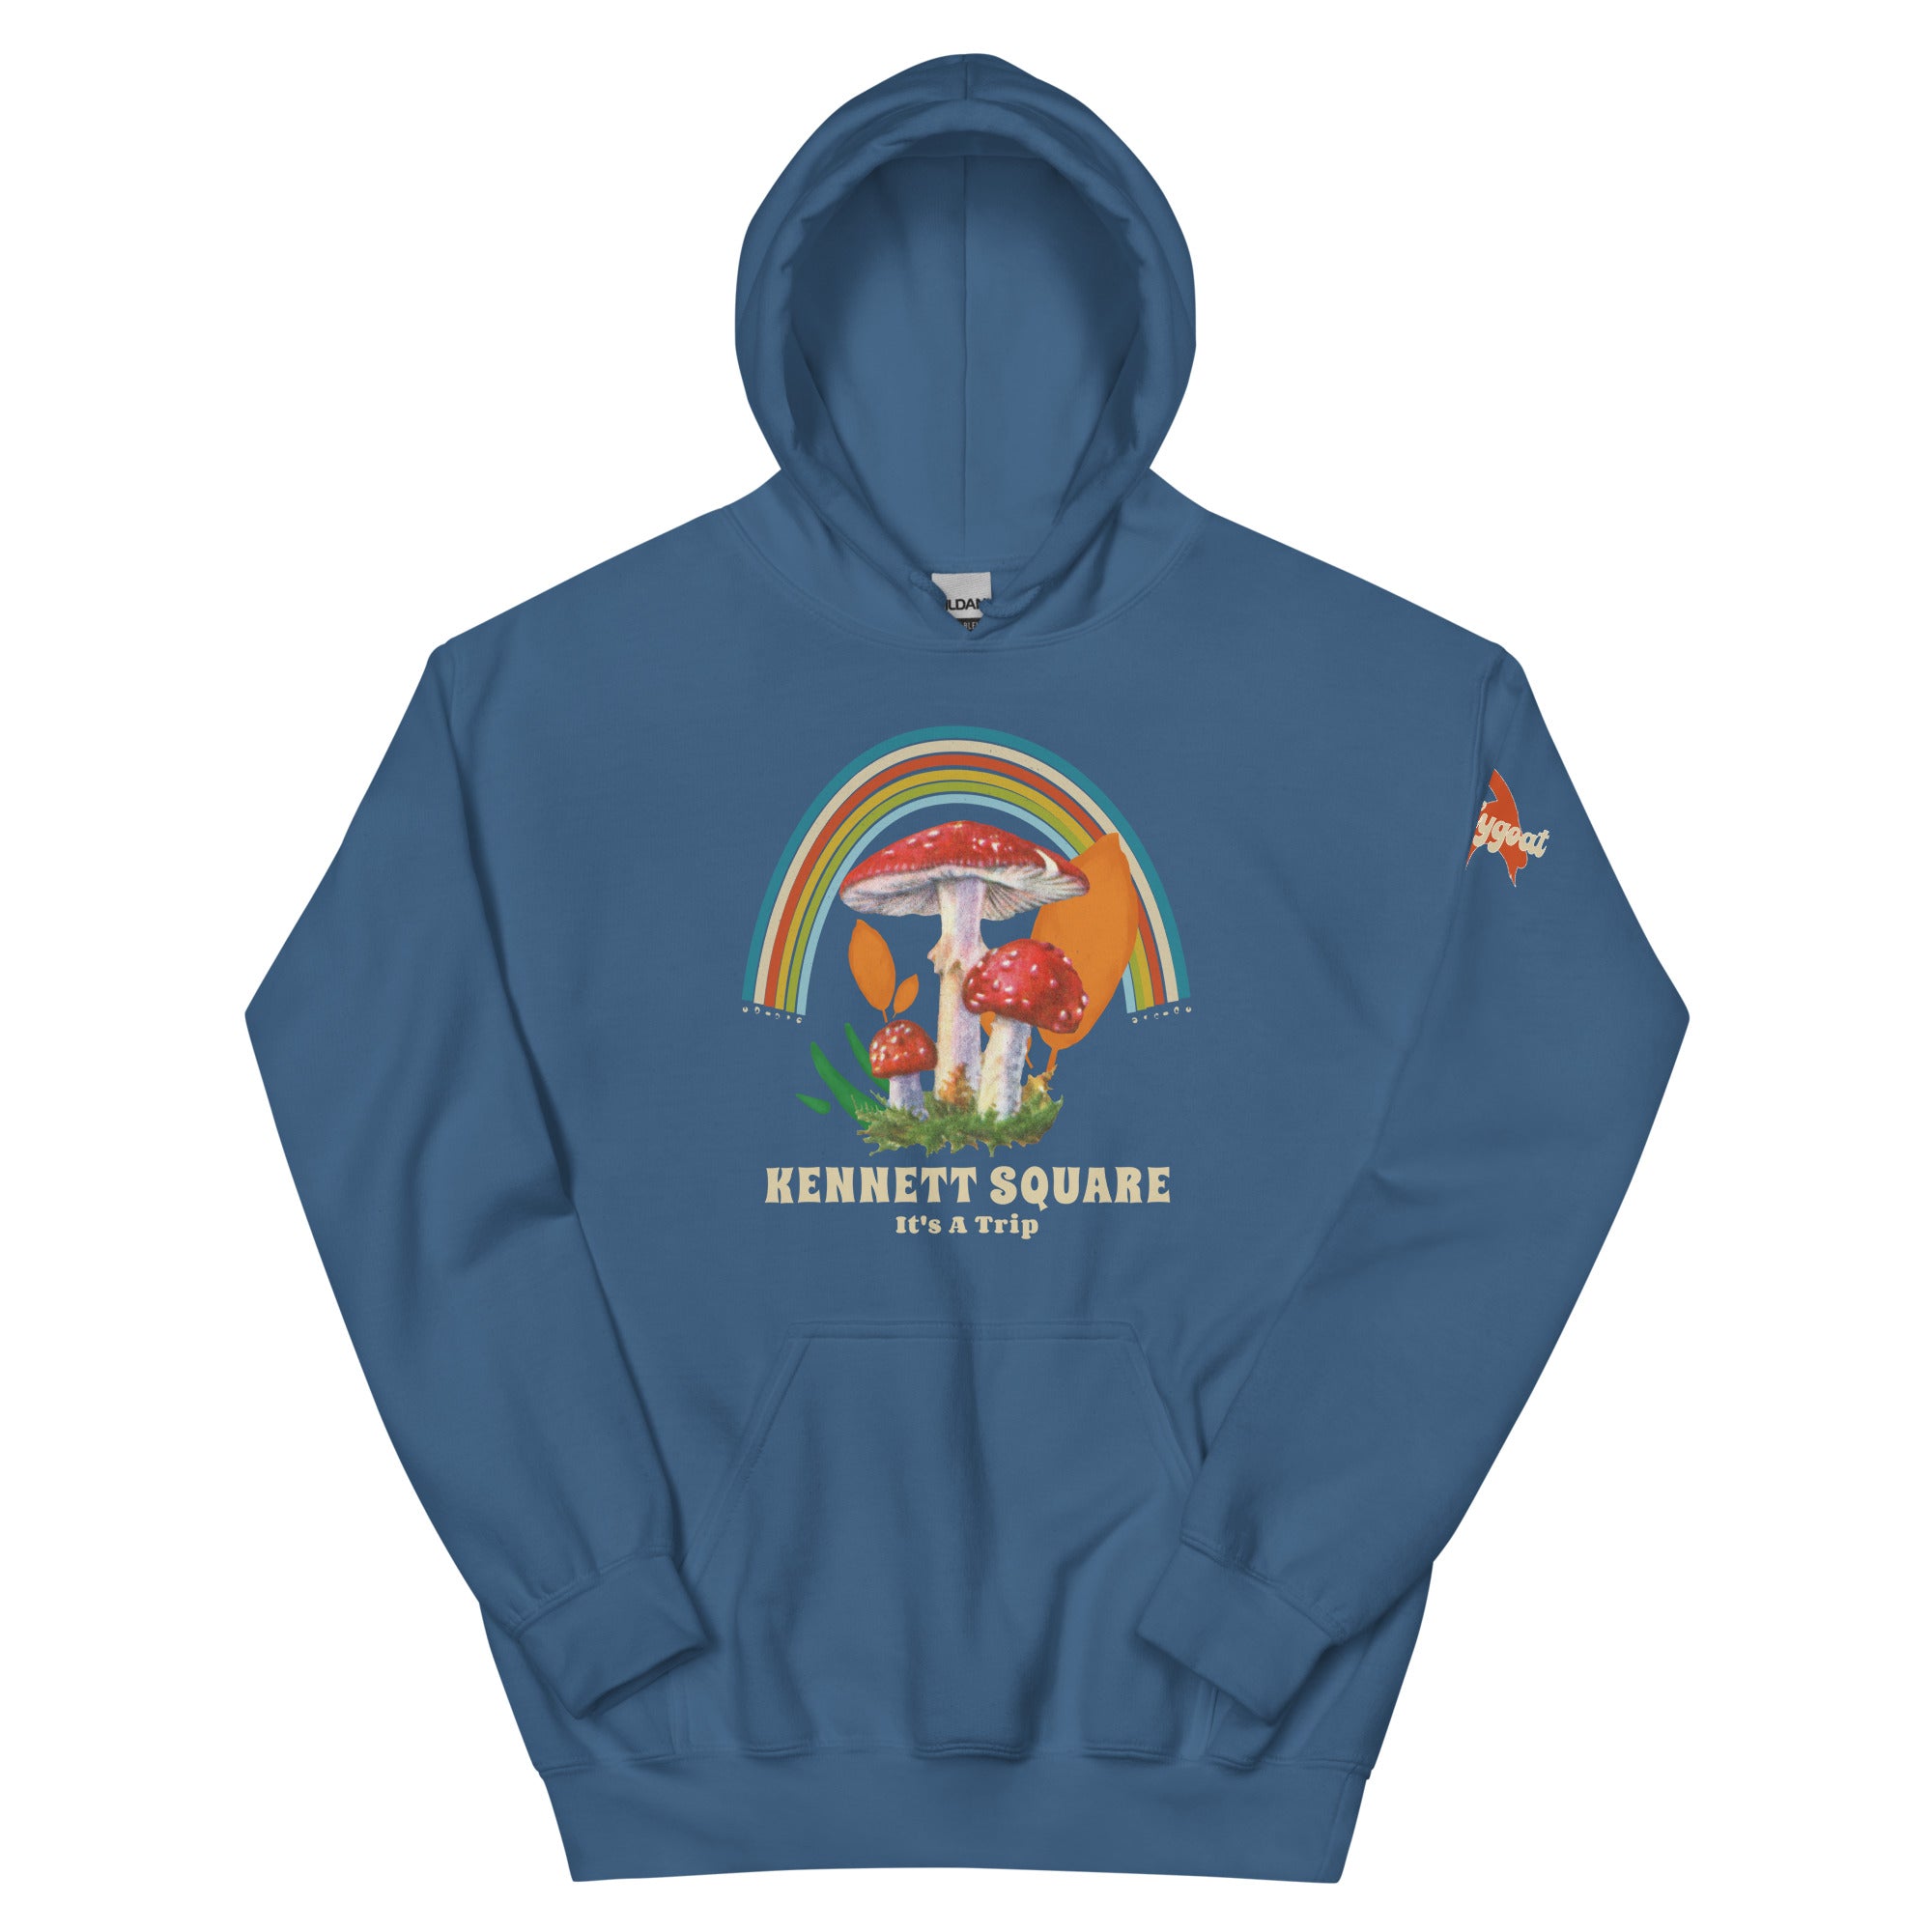 "Kennett Square Is a Trip" Hoodie